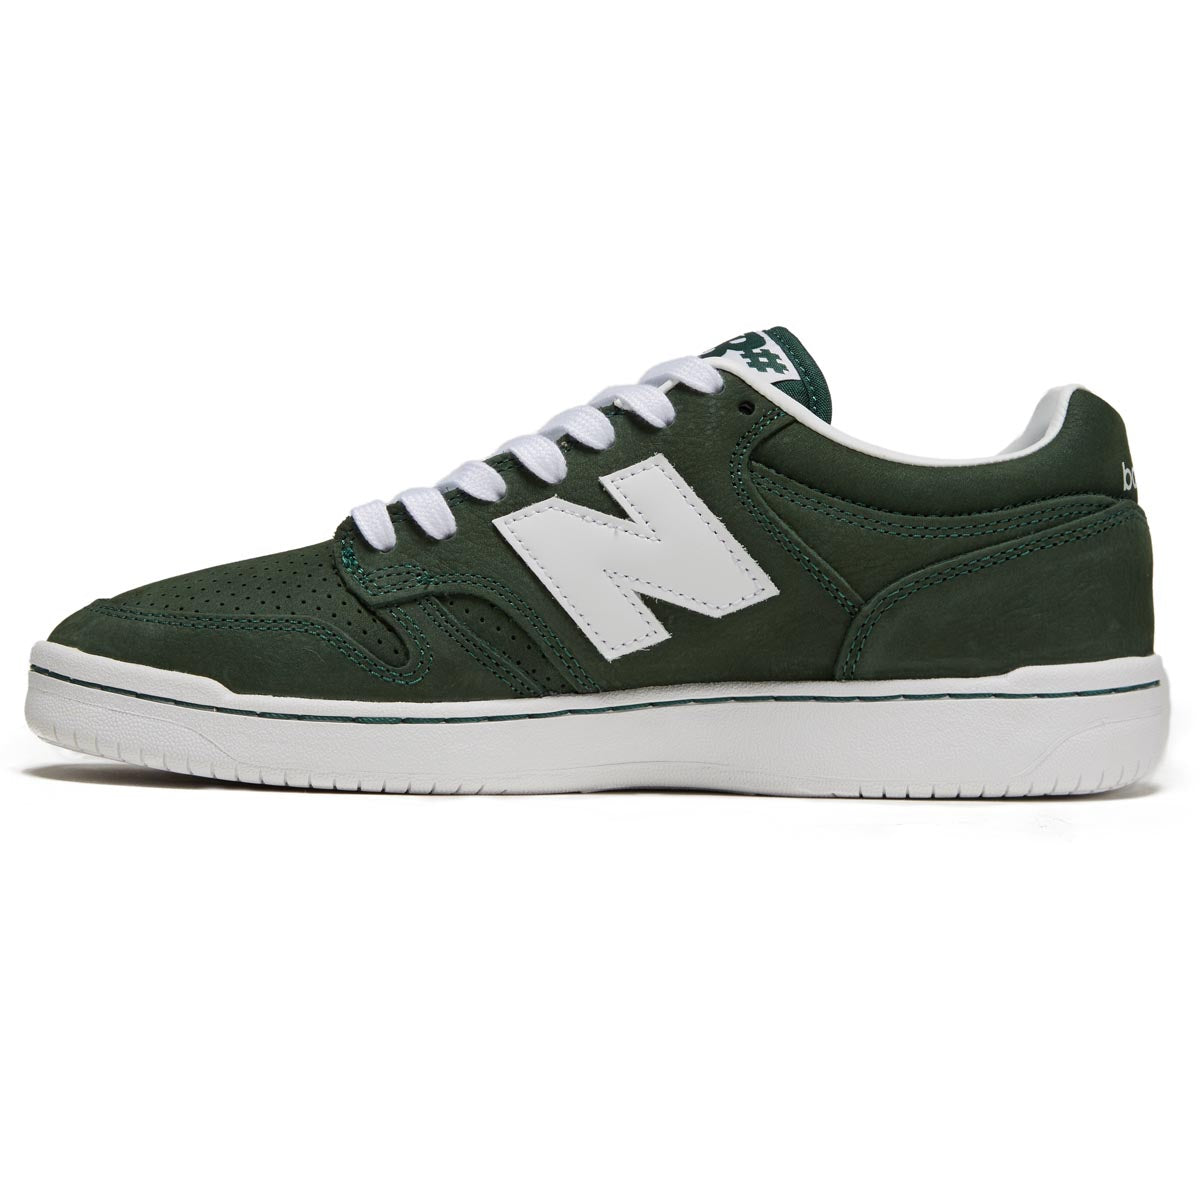 New Balance 480 Shoes - Forest Green/White image 2